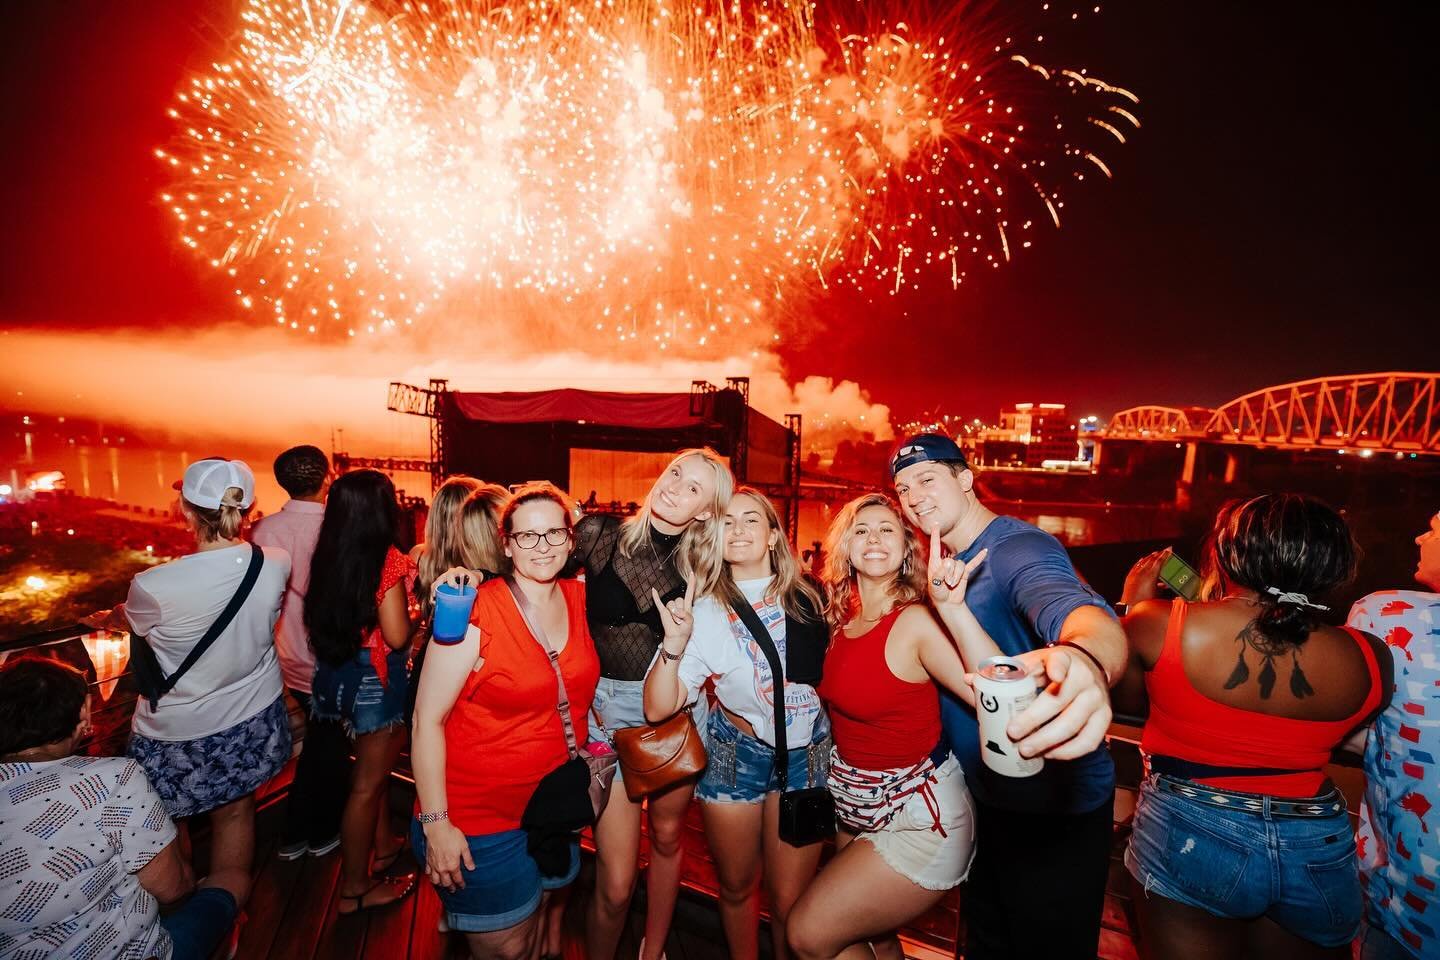 Fireworks, free beer, and fun‼️ Our annual VIP rooftop 4th of July party is back and better than ever 🫡

Tickets go on sale to our email subscribers THIS THURSDAY! Sign up at the link in bio for early bird access 👉 Tickets sell out fast‼️ 

#nashvi